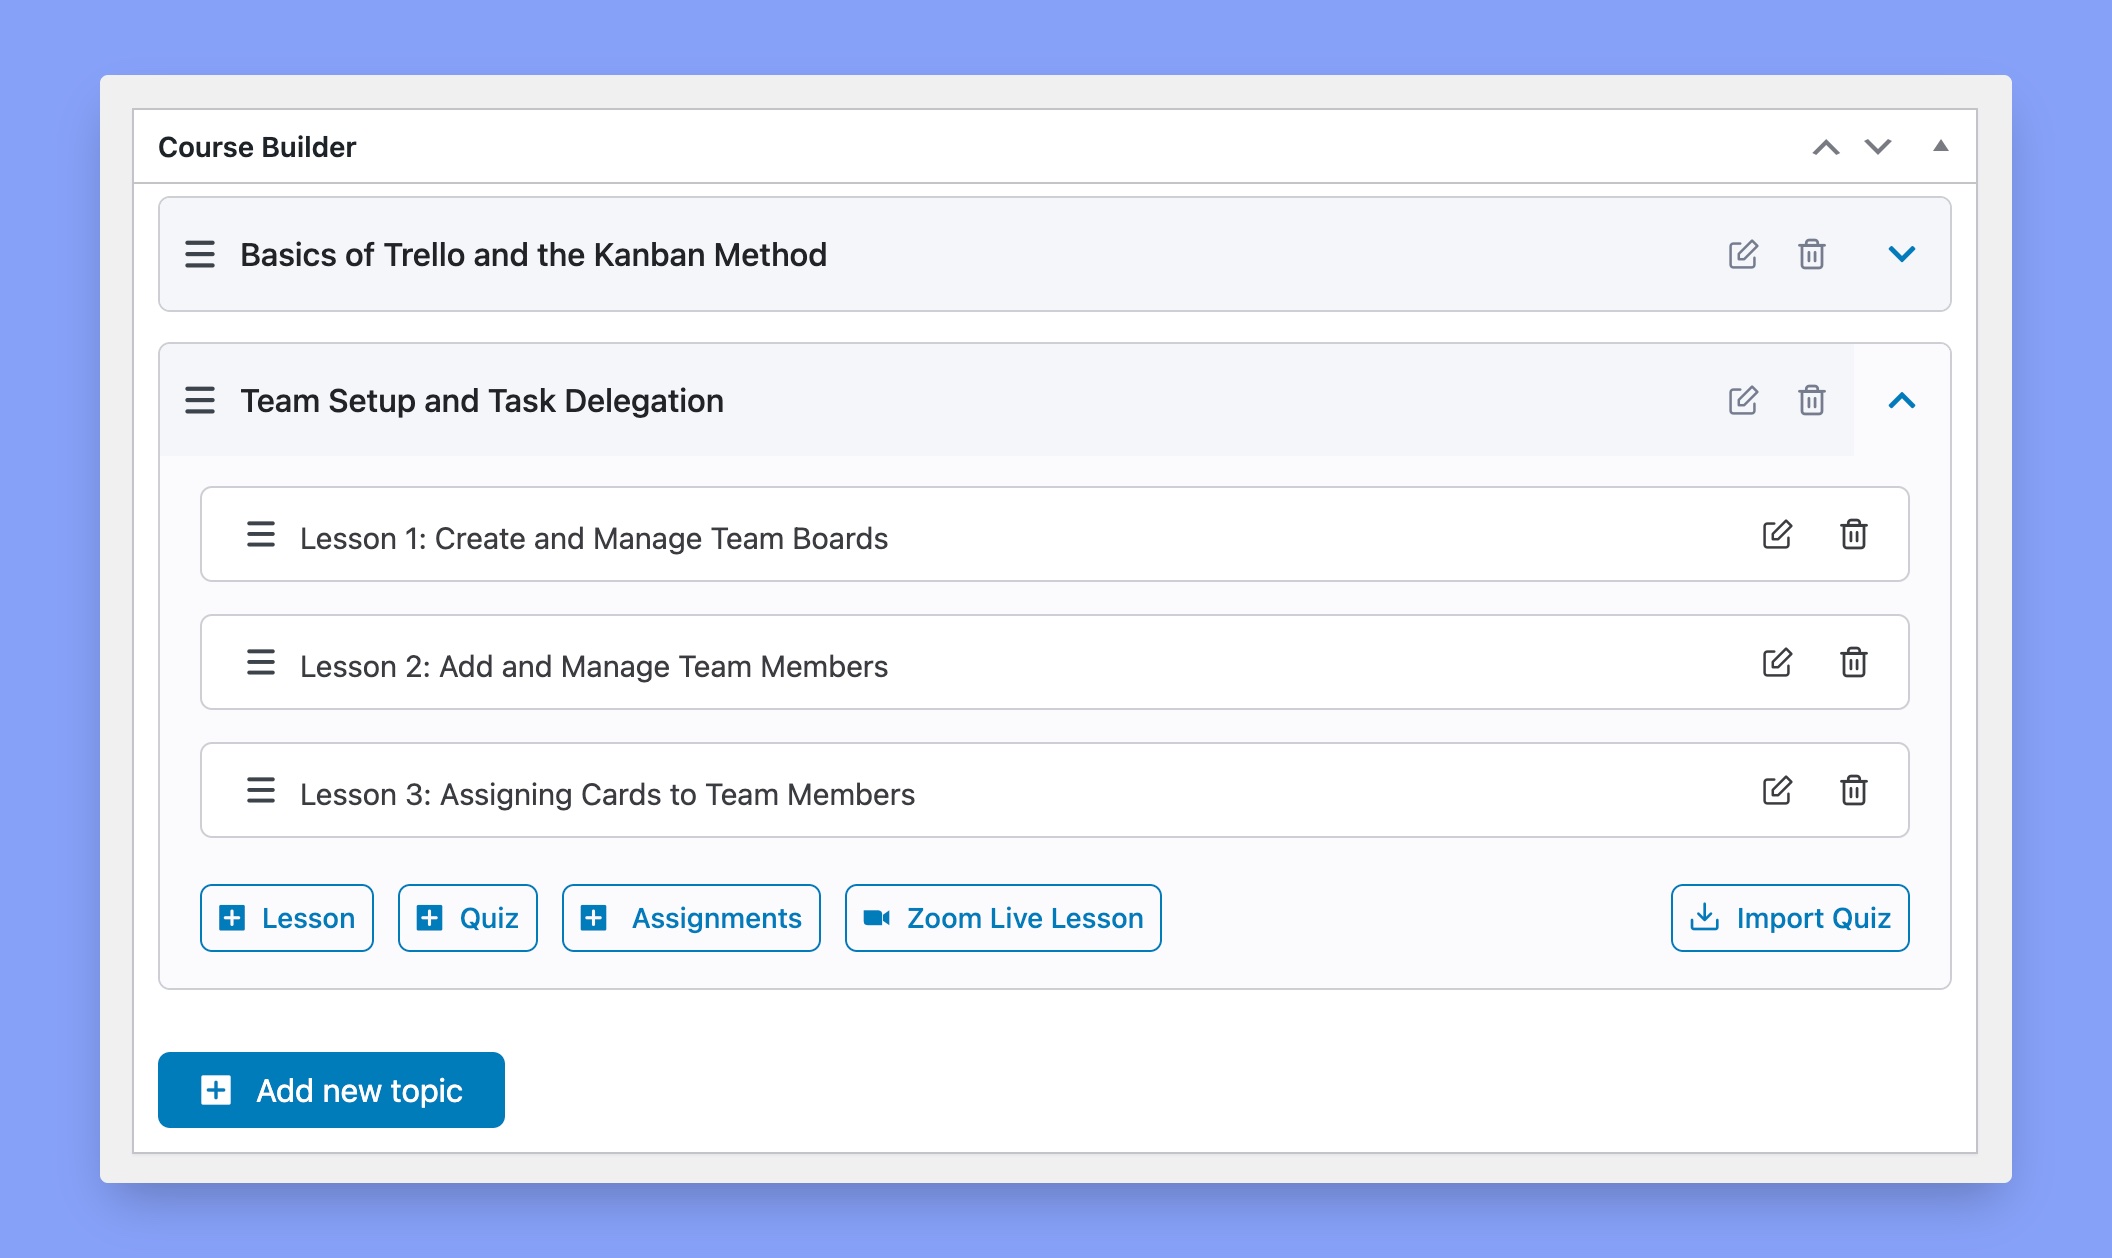 Backend course builder of Tutor LMS